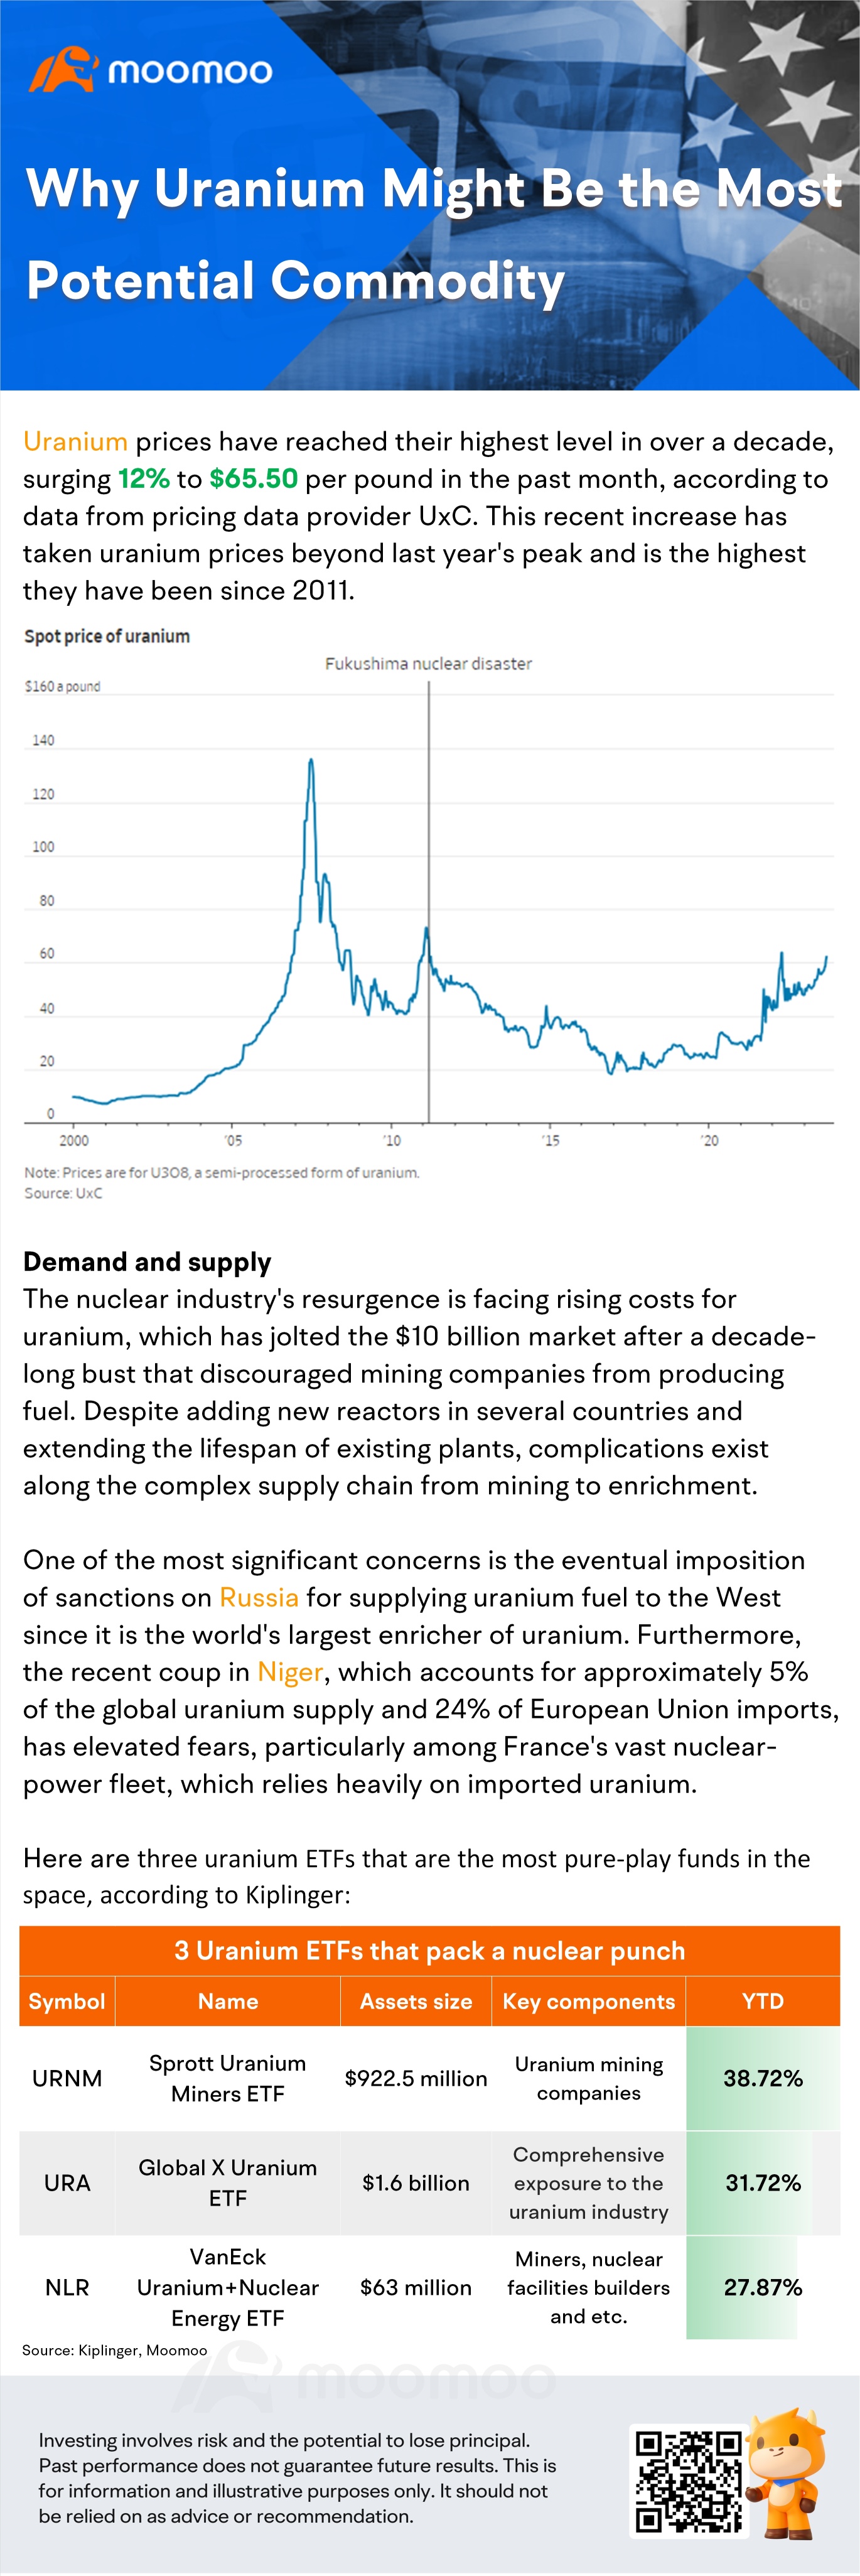 Why Uranium Might Be the Most Potential Commodity